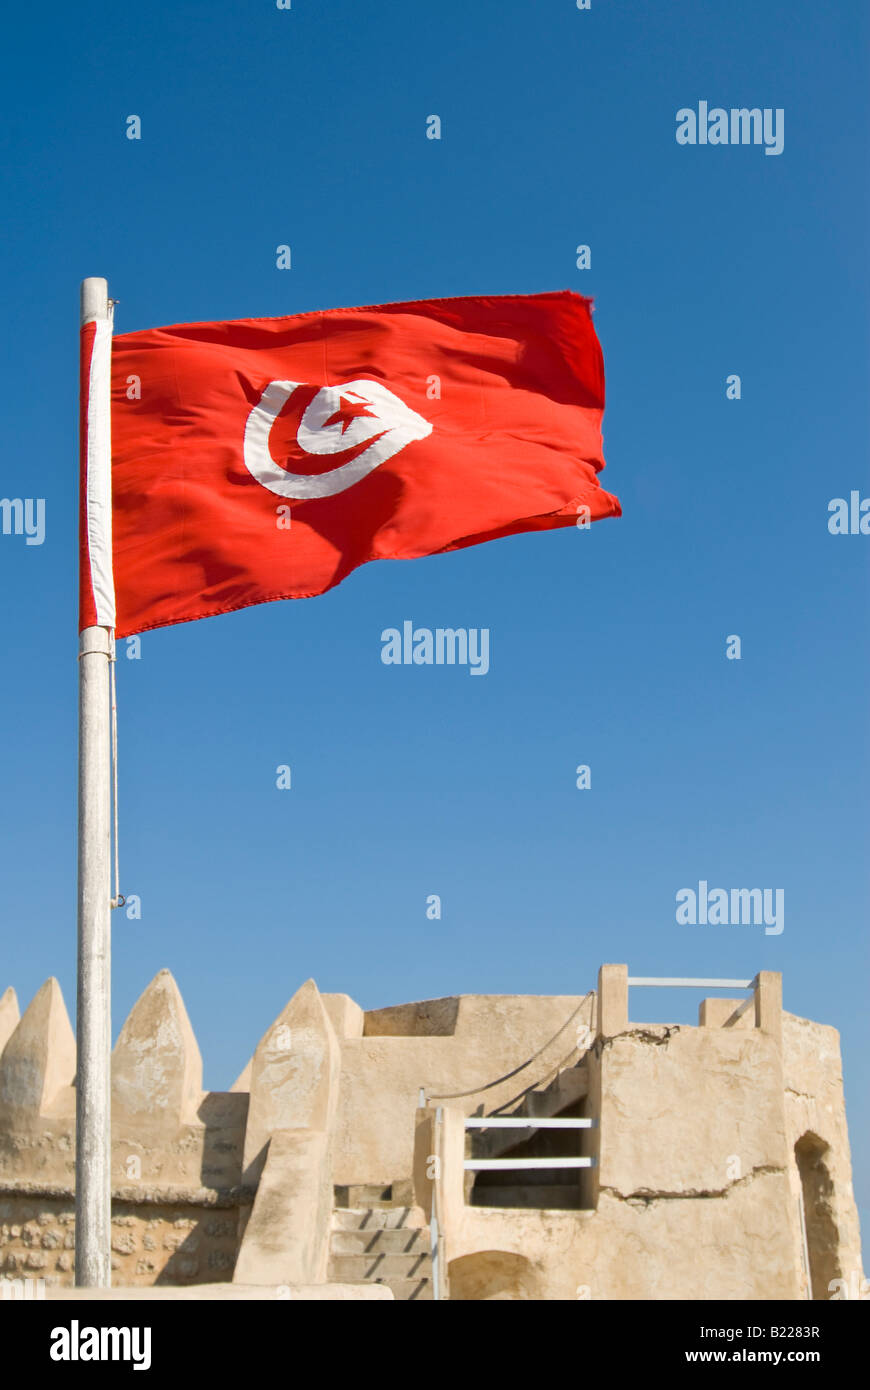 Vertical close up of the 'post 1999' Tunisian flag with red crescent and star against a blue sky Stock Photo